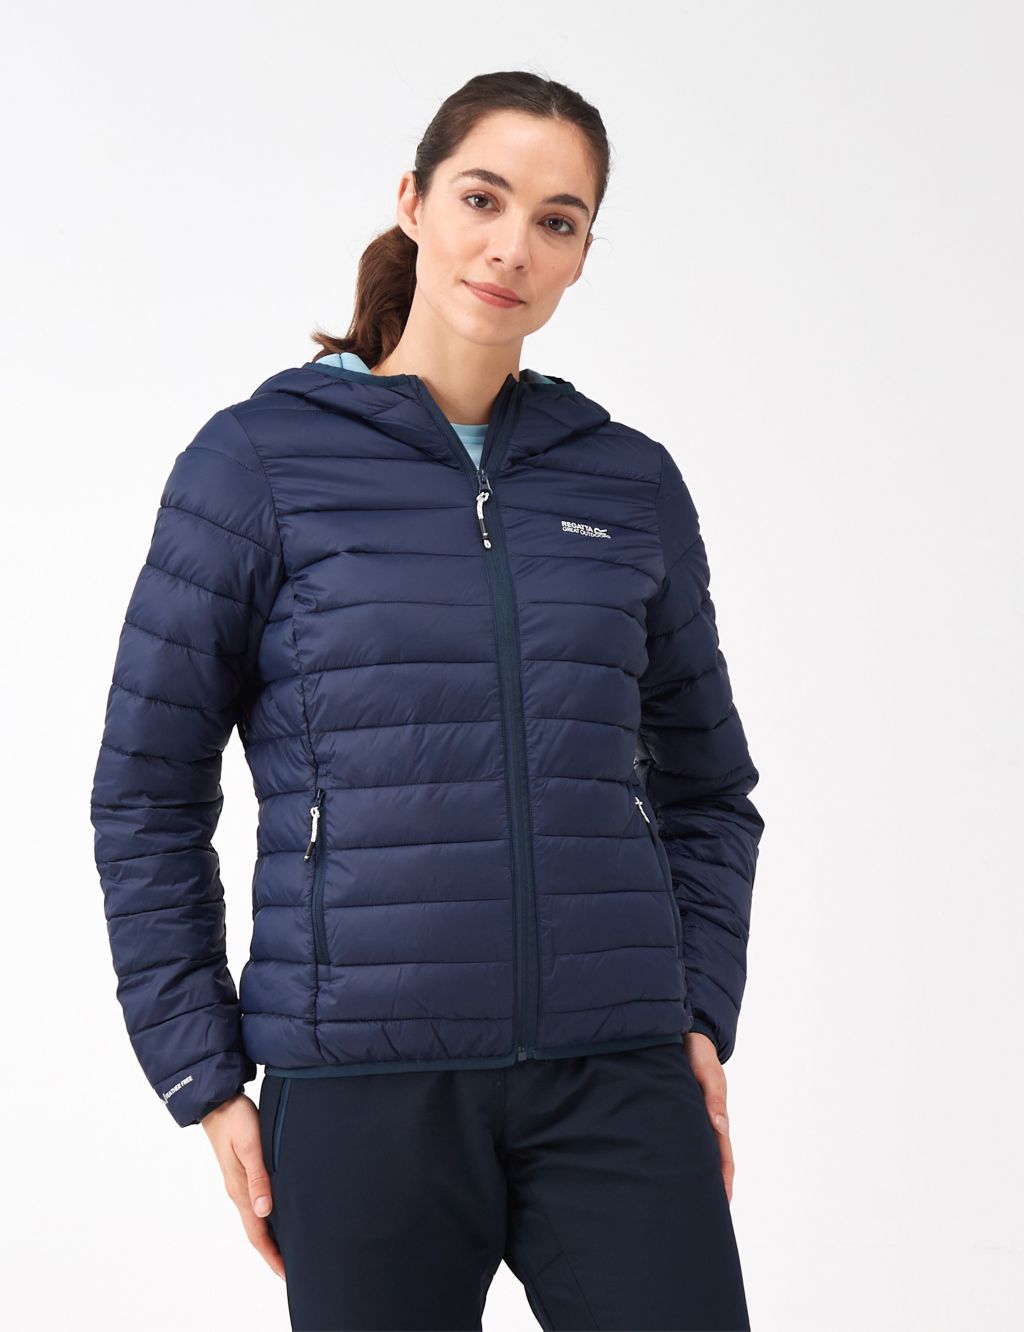 Marizion Water-Repellent Padded Jacket image 1